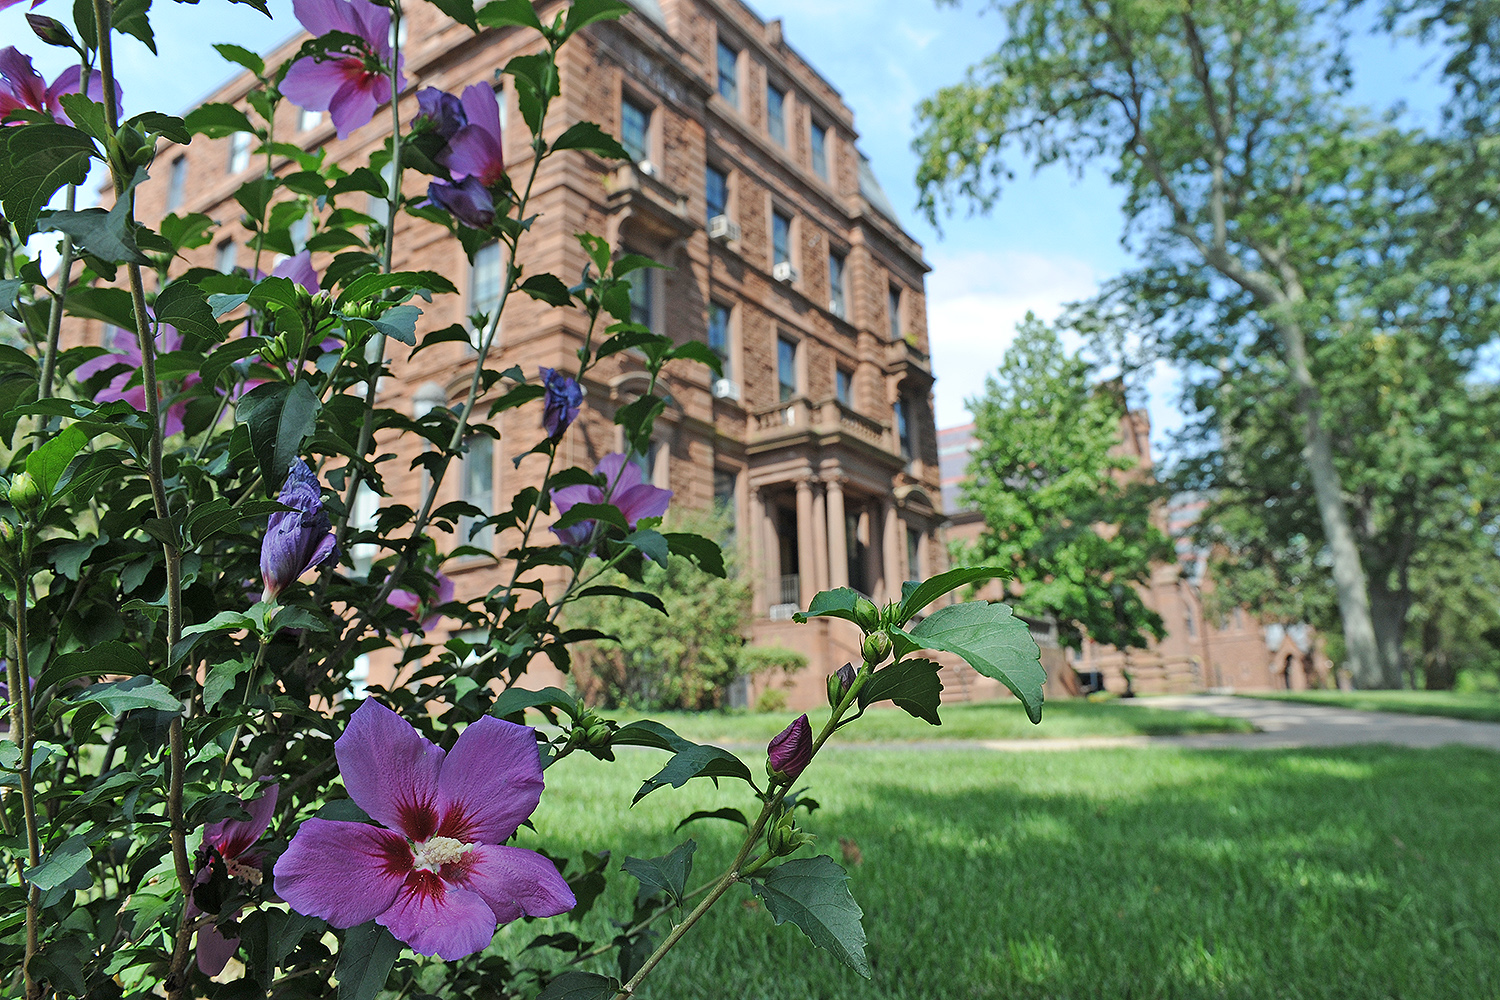 A Rose of Sharon, a deciduous flowering shrub, blooms near Judd Hall.